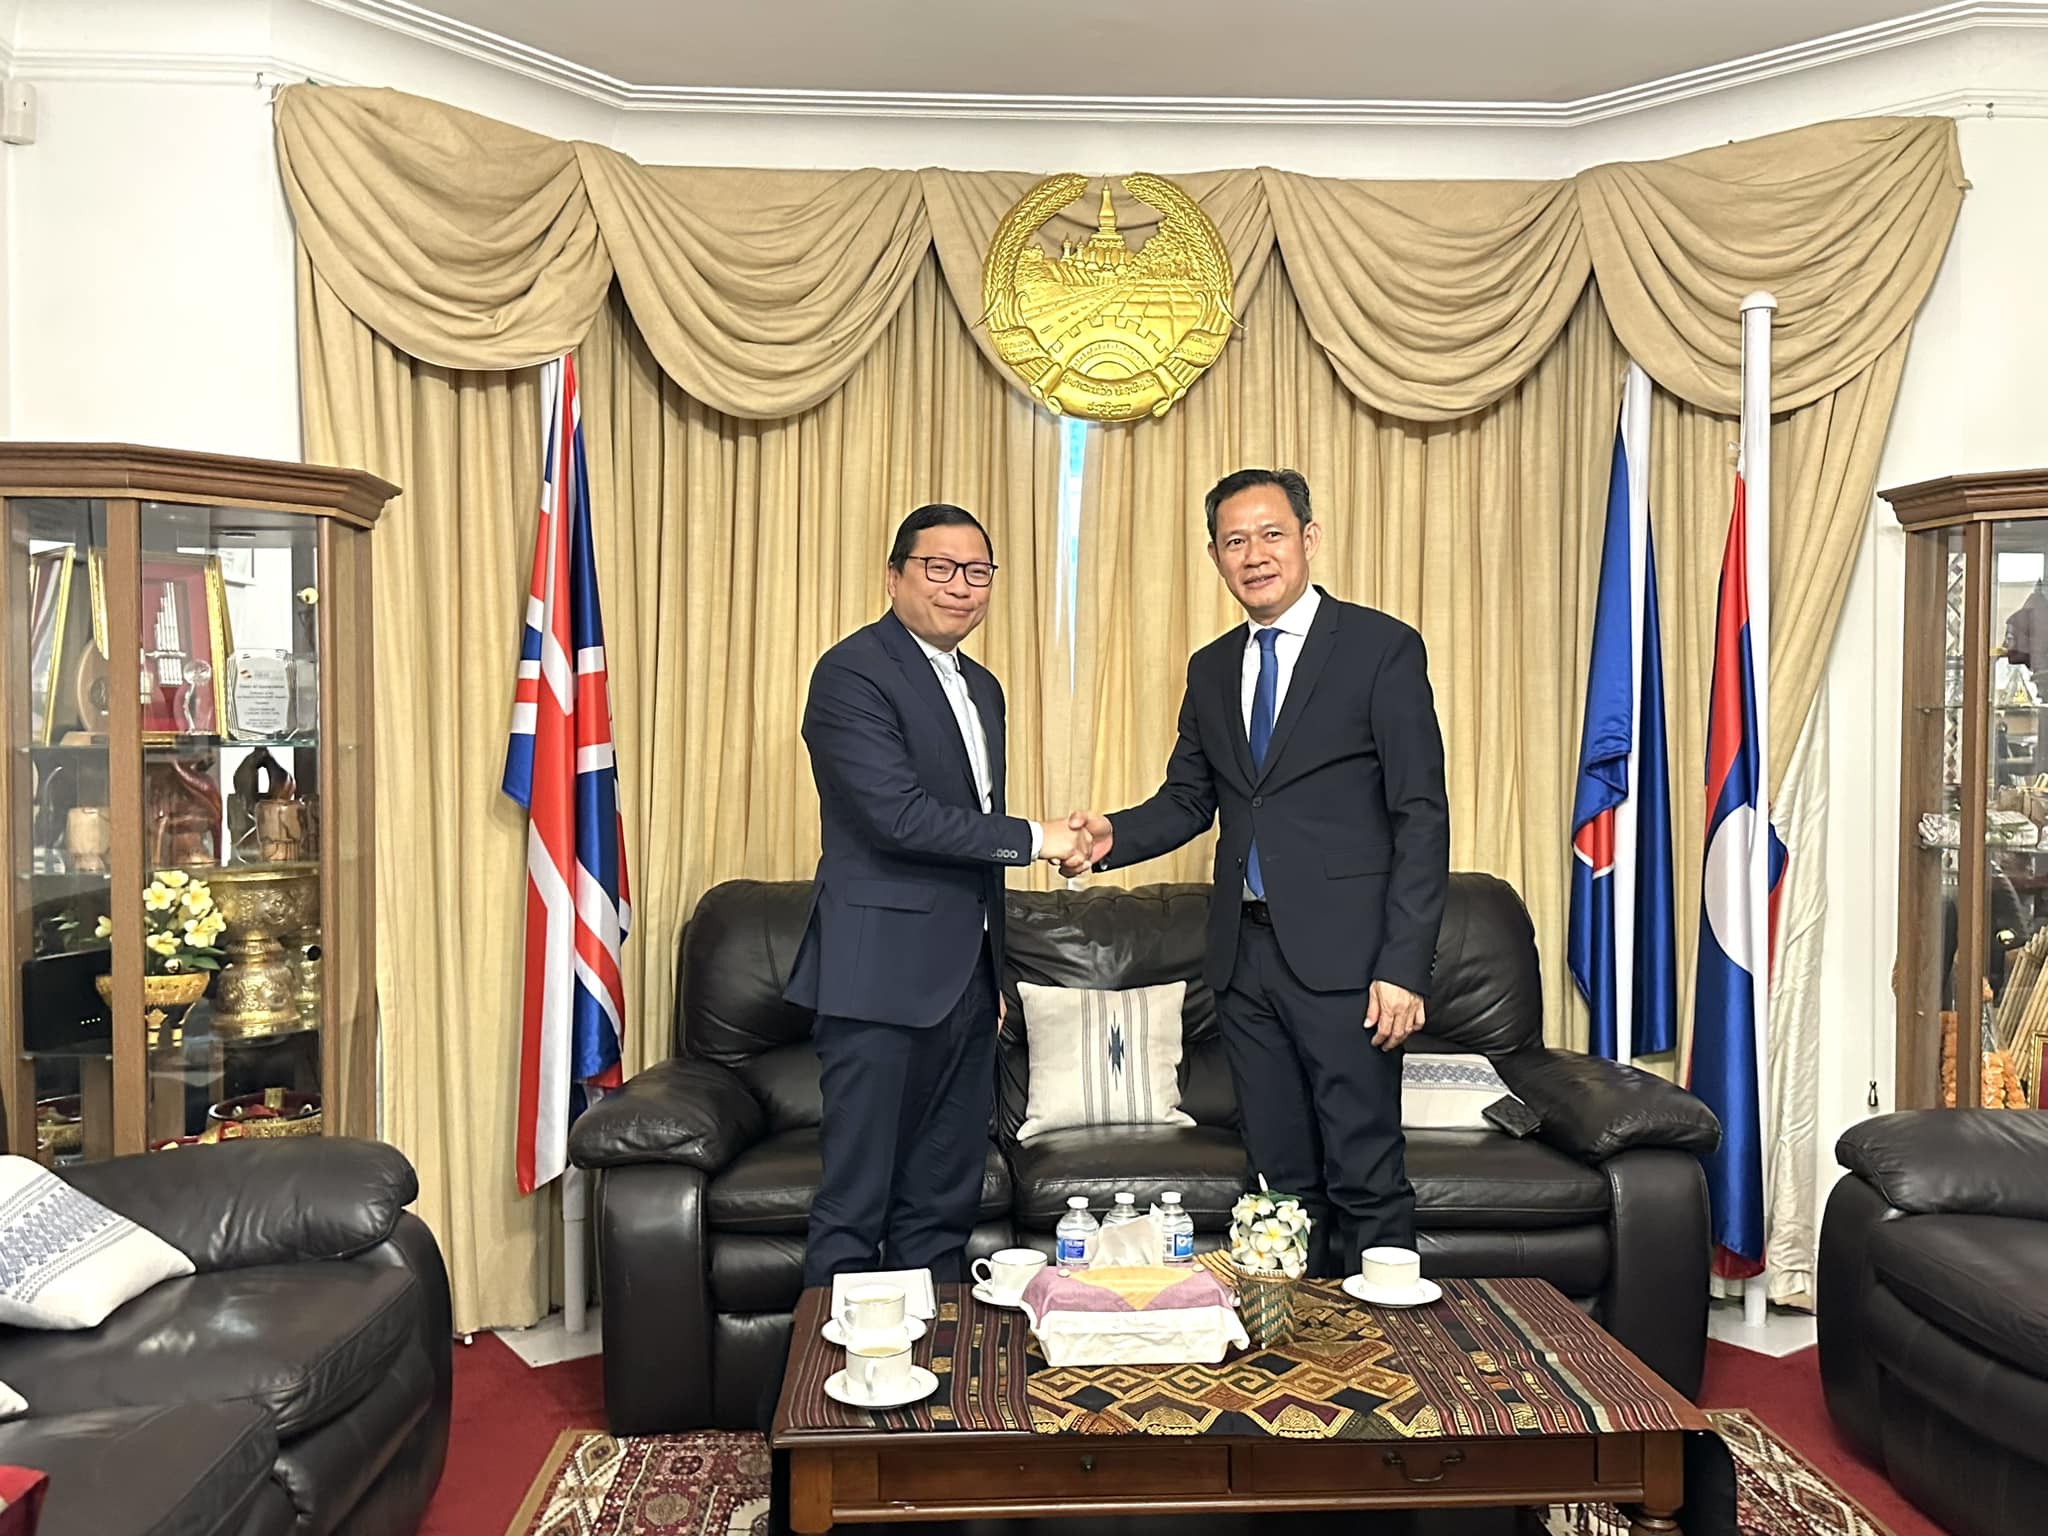 His Excellency Ambassador Lay Samkol paid a courtesy call on His ...